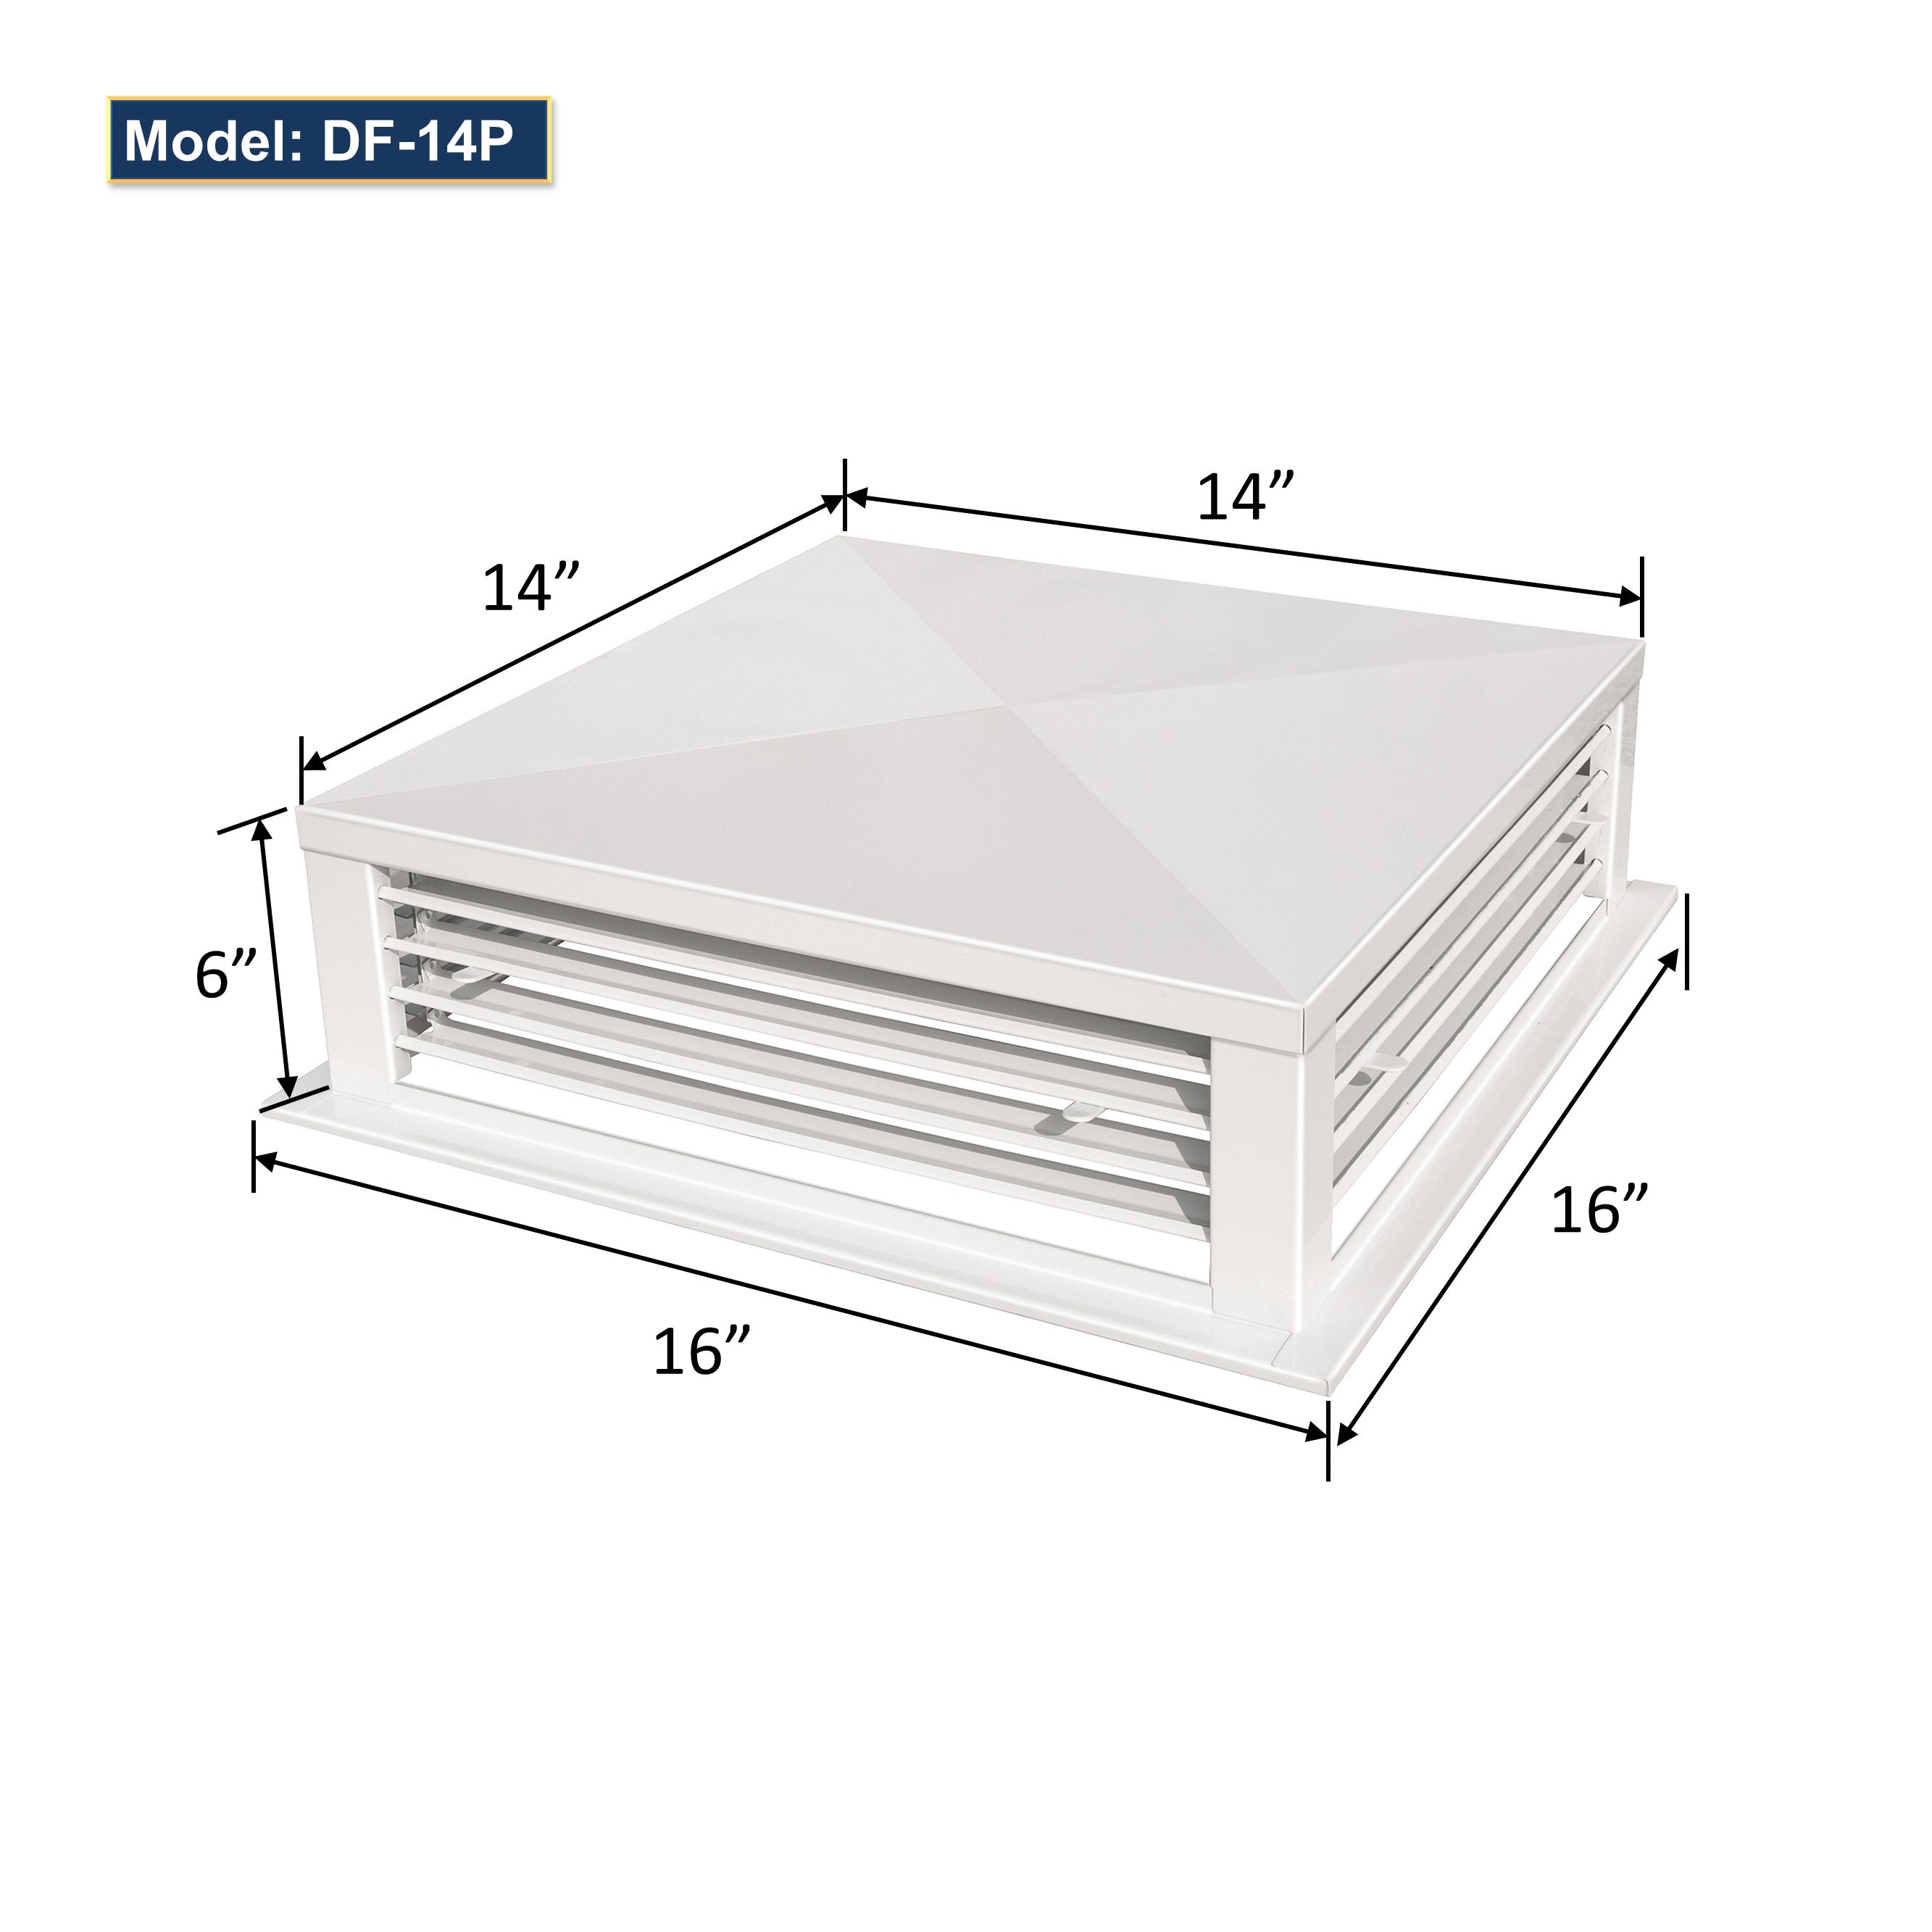 GSW 14” White Powder Coated 4-Way Adjustable Air Diffuser for Evaporative Swamp Cooler, 16” Mounting Edge (14"x14"x6")